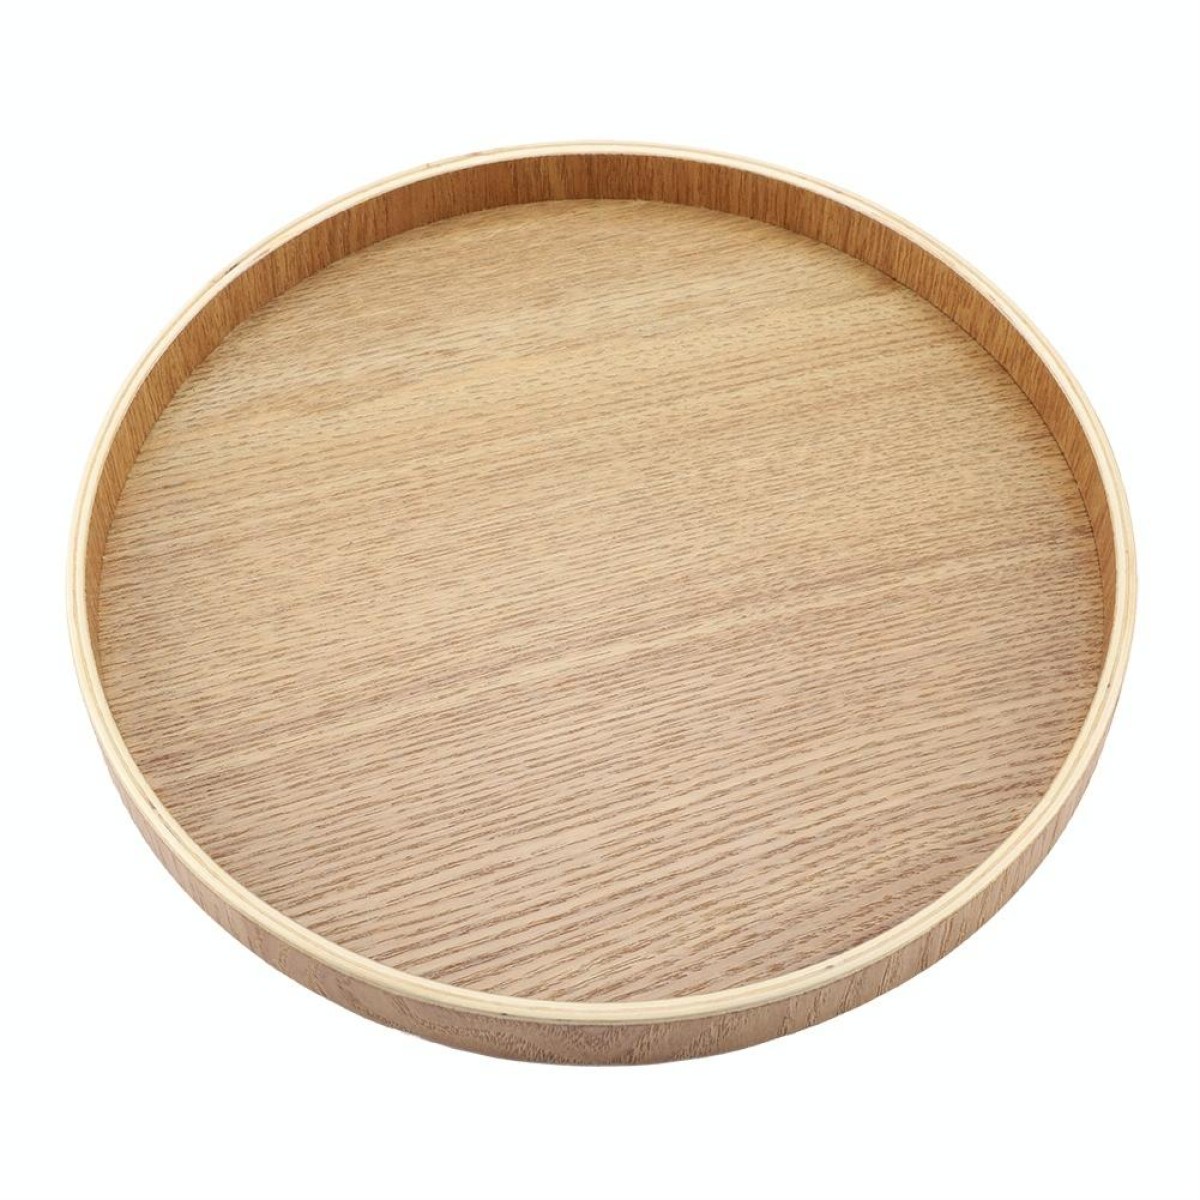 Creative Round Solid Wood Tea Tray Hotel Wooden Tay Storage Tray, Diameter: 24 cm